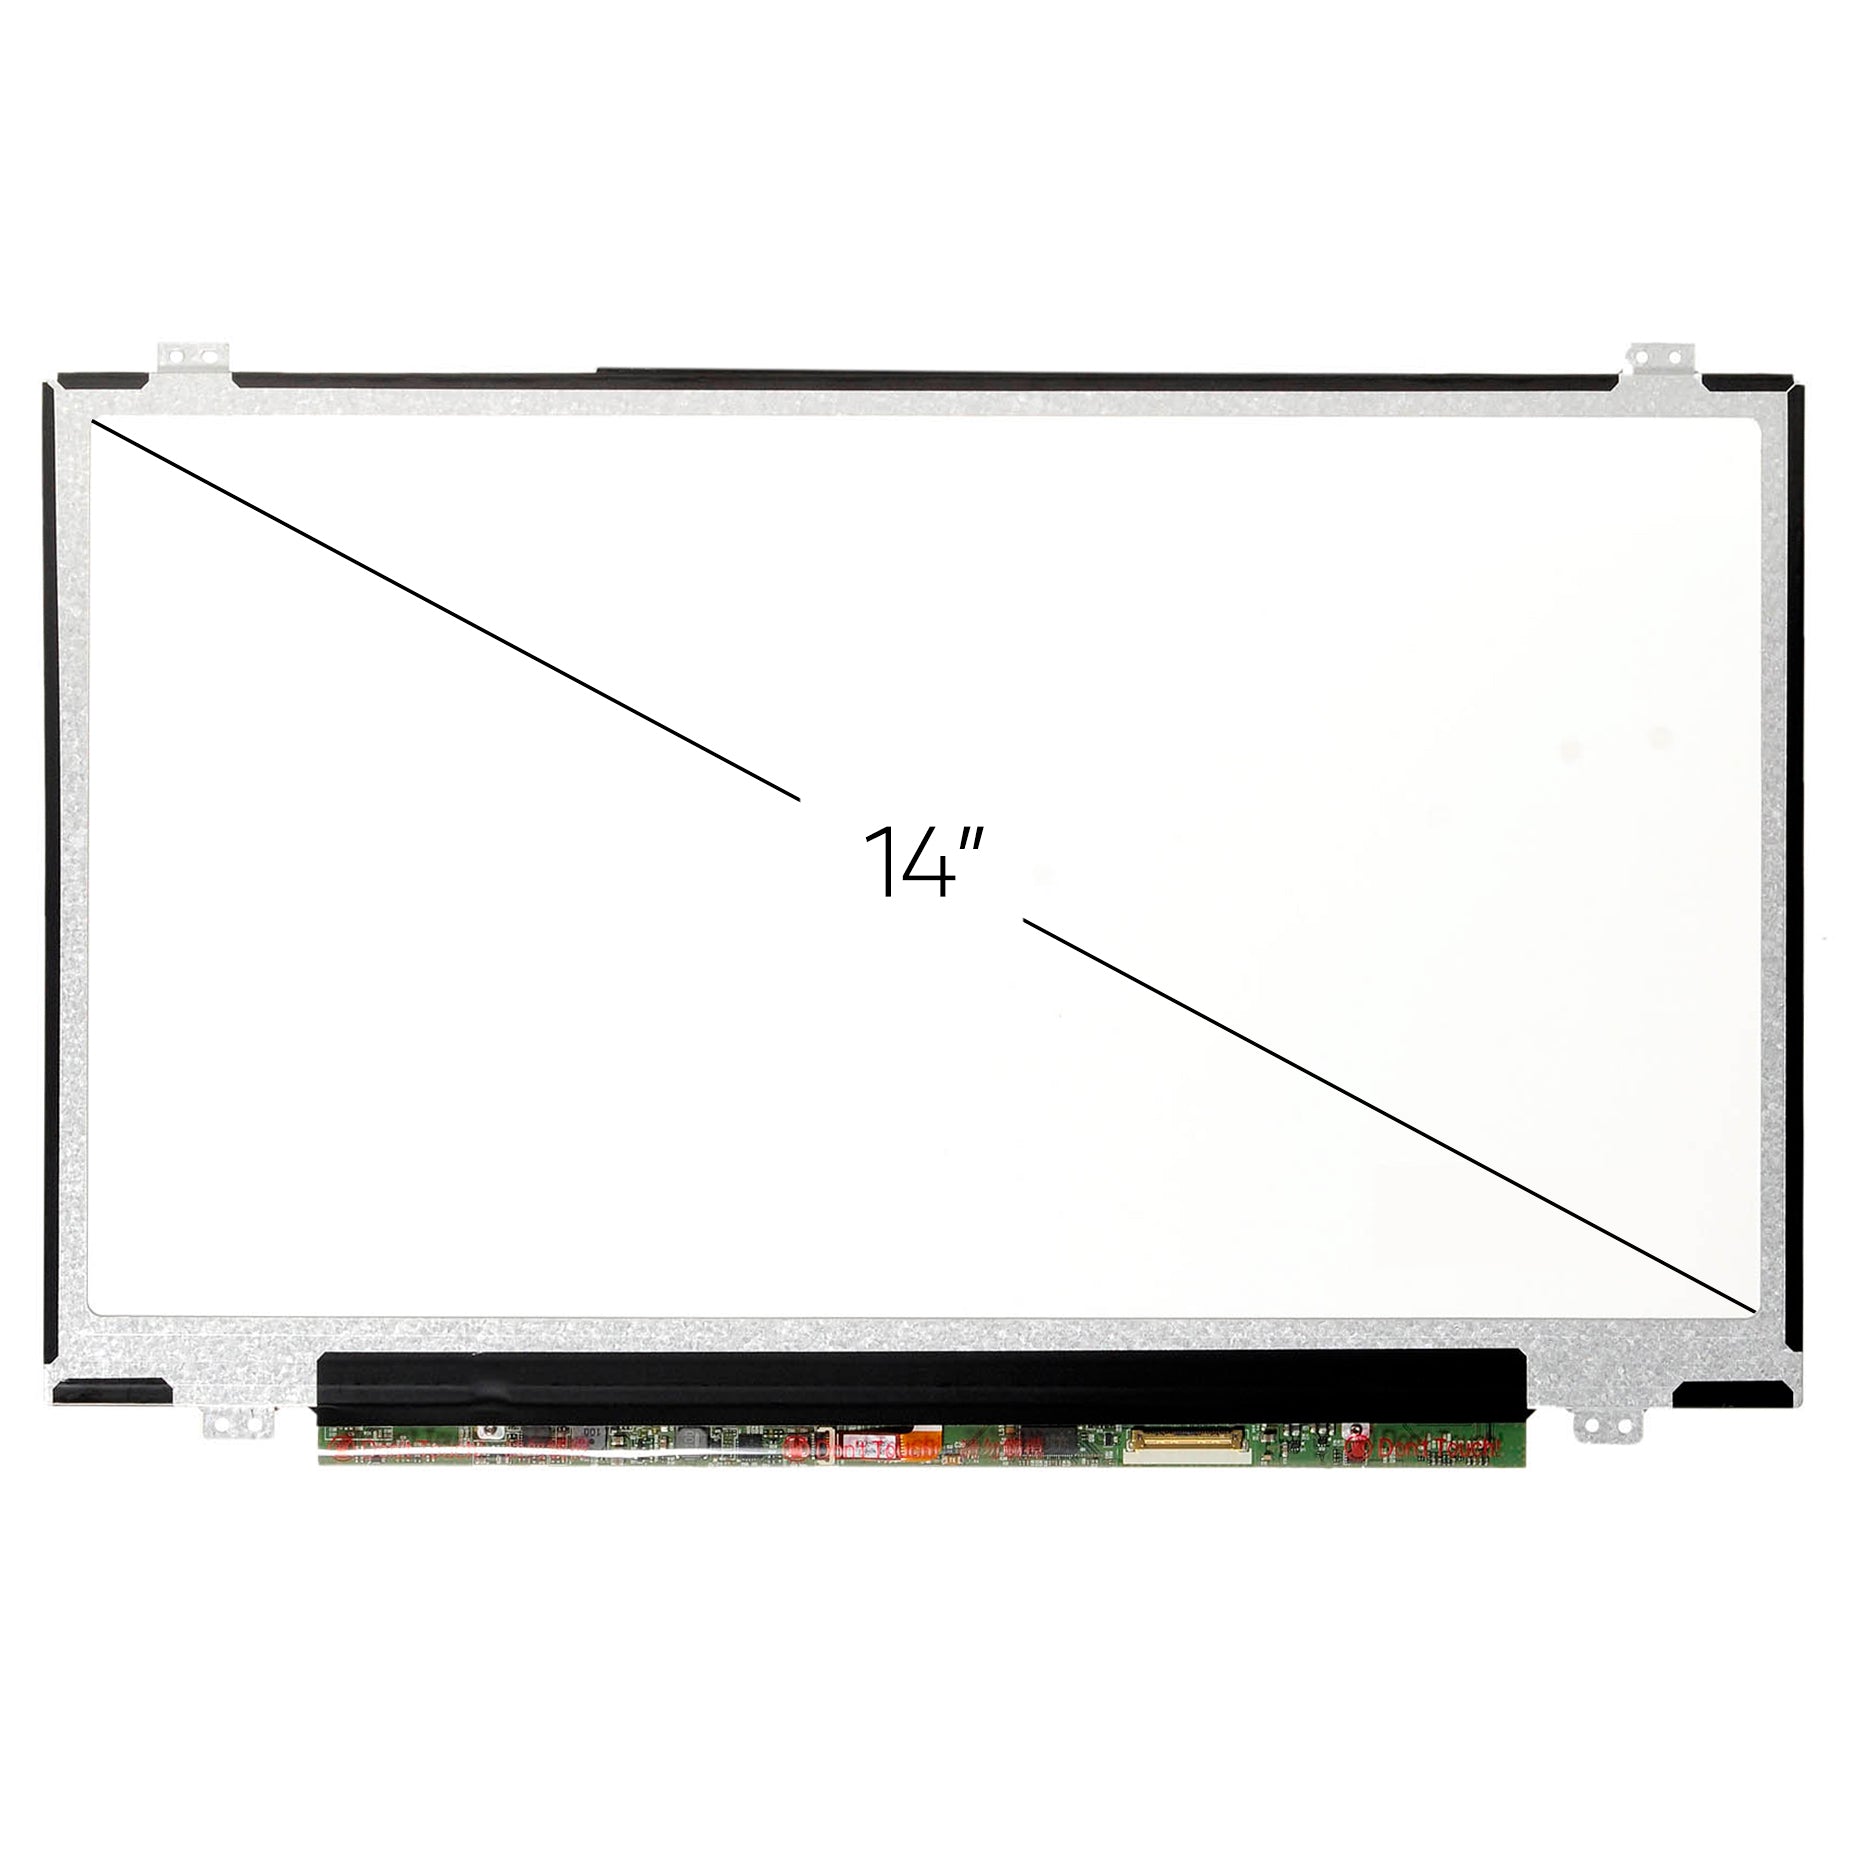 Screen Replacement for HP Chromebook 14-AK060NR FHD 1920x1080 IPS Matte LCD LED Display